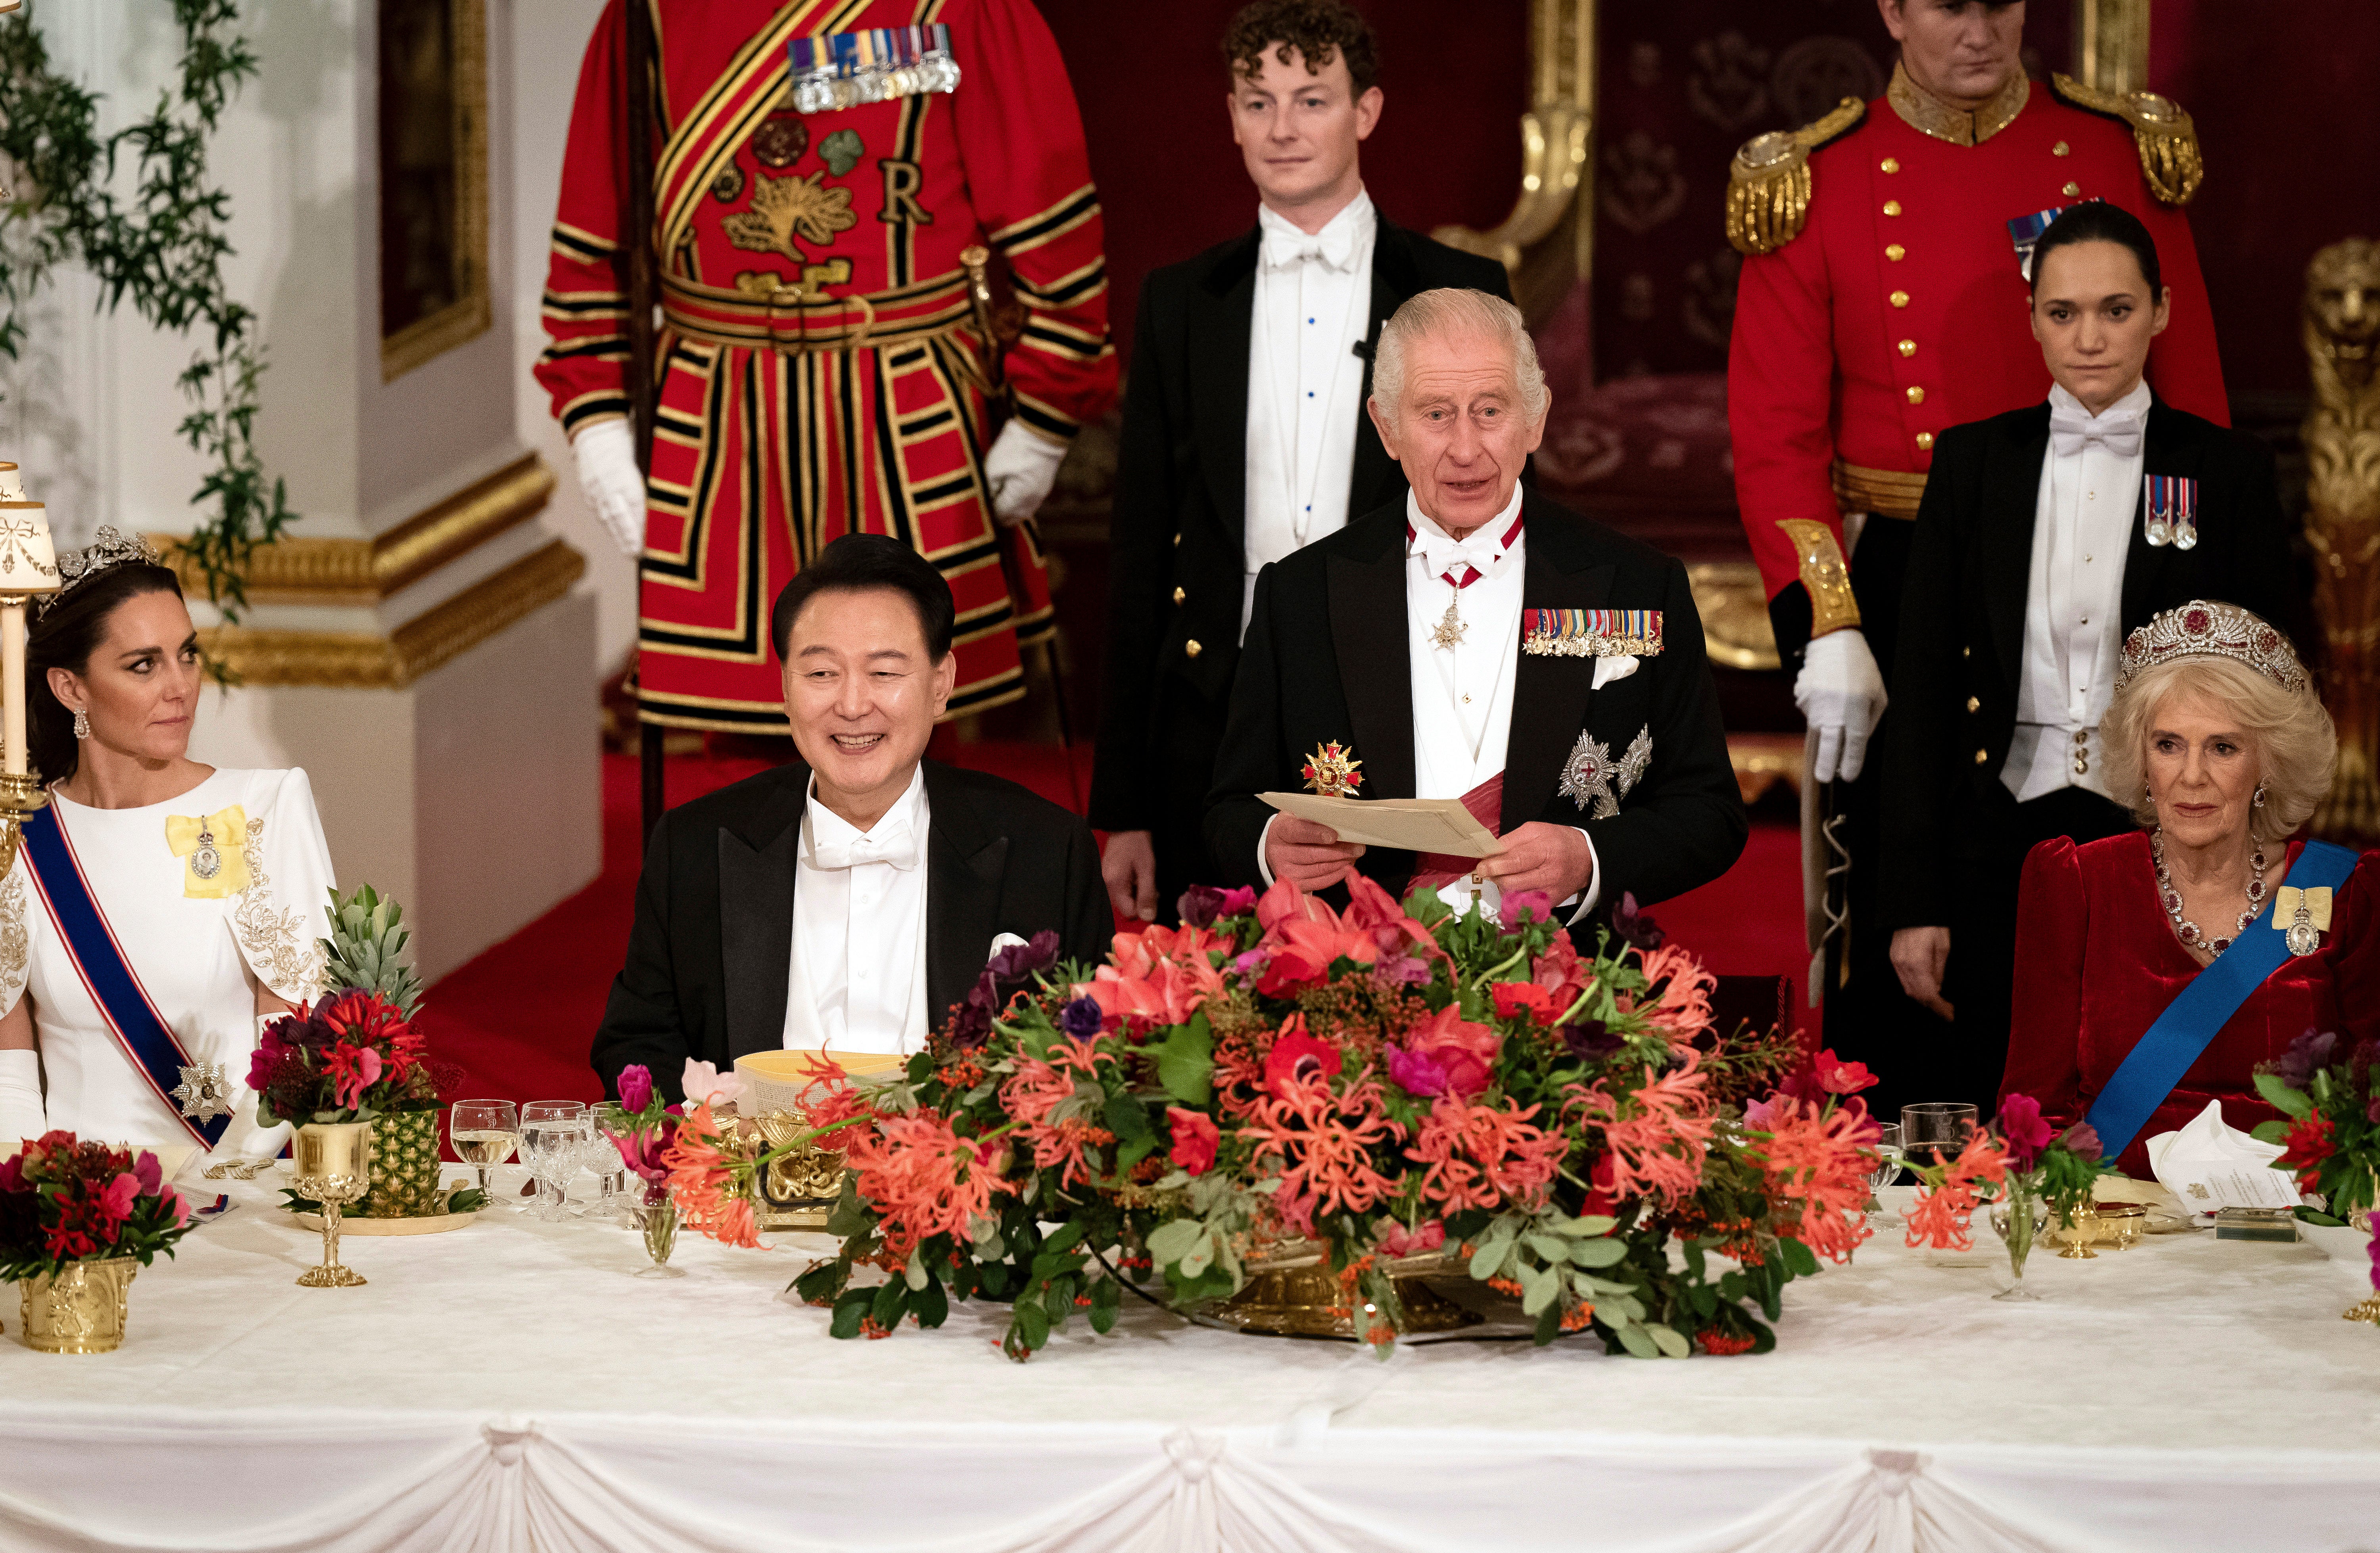 south korean, king charles iii, royal family share behind-the-scenes footage of lavish banquet for south korean president